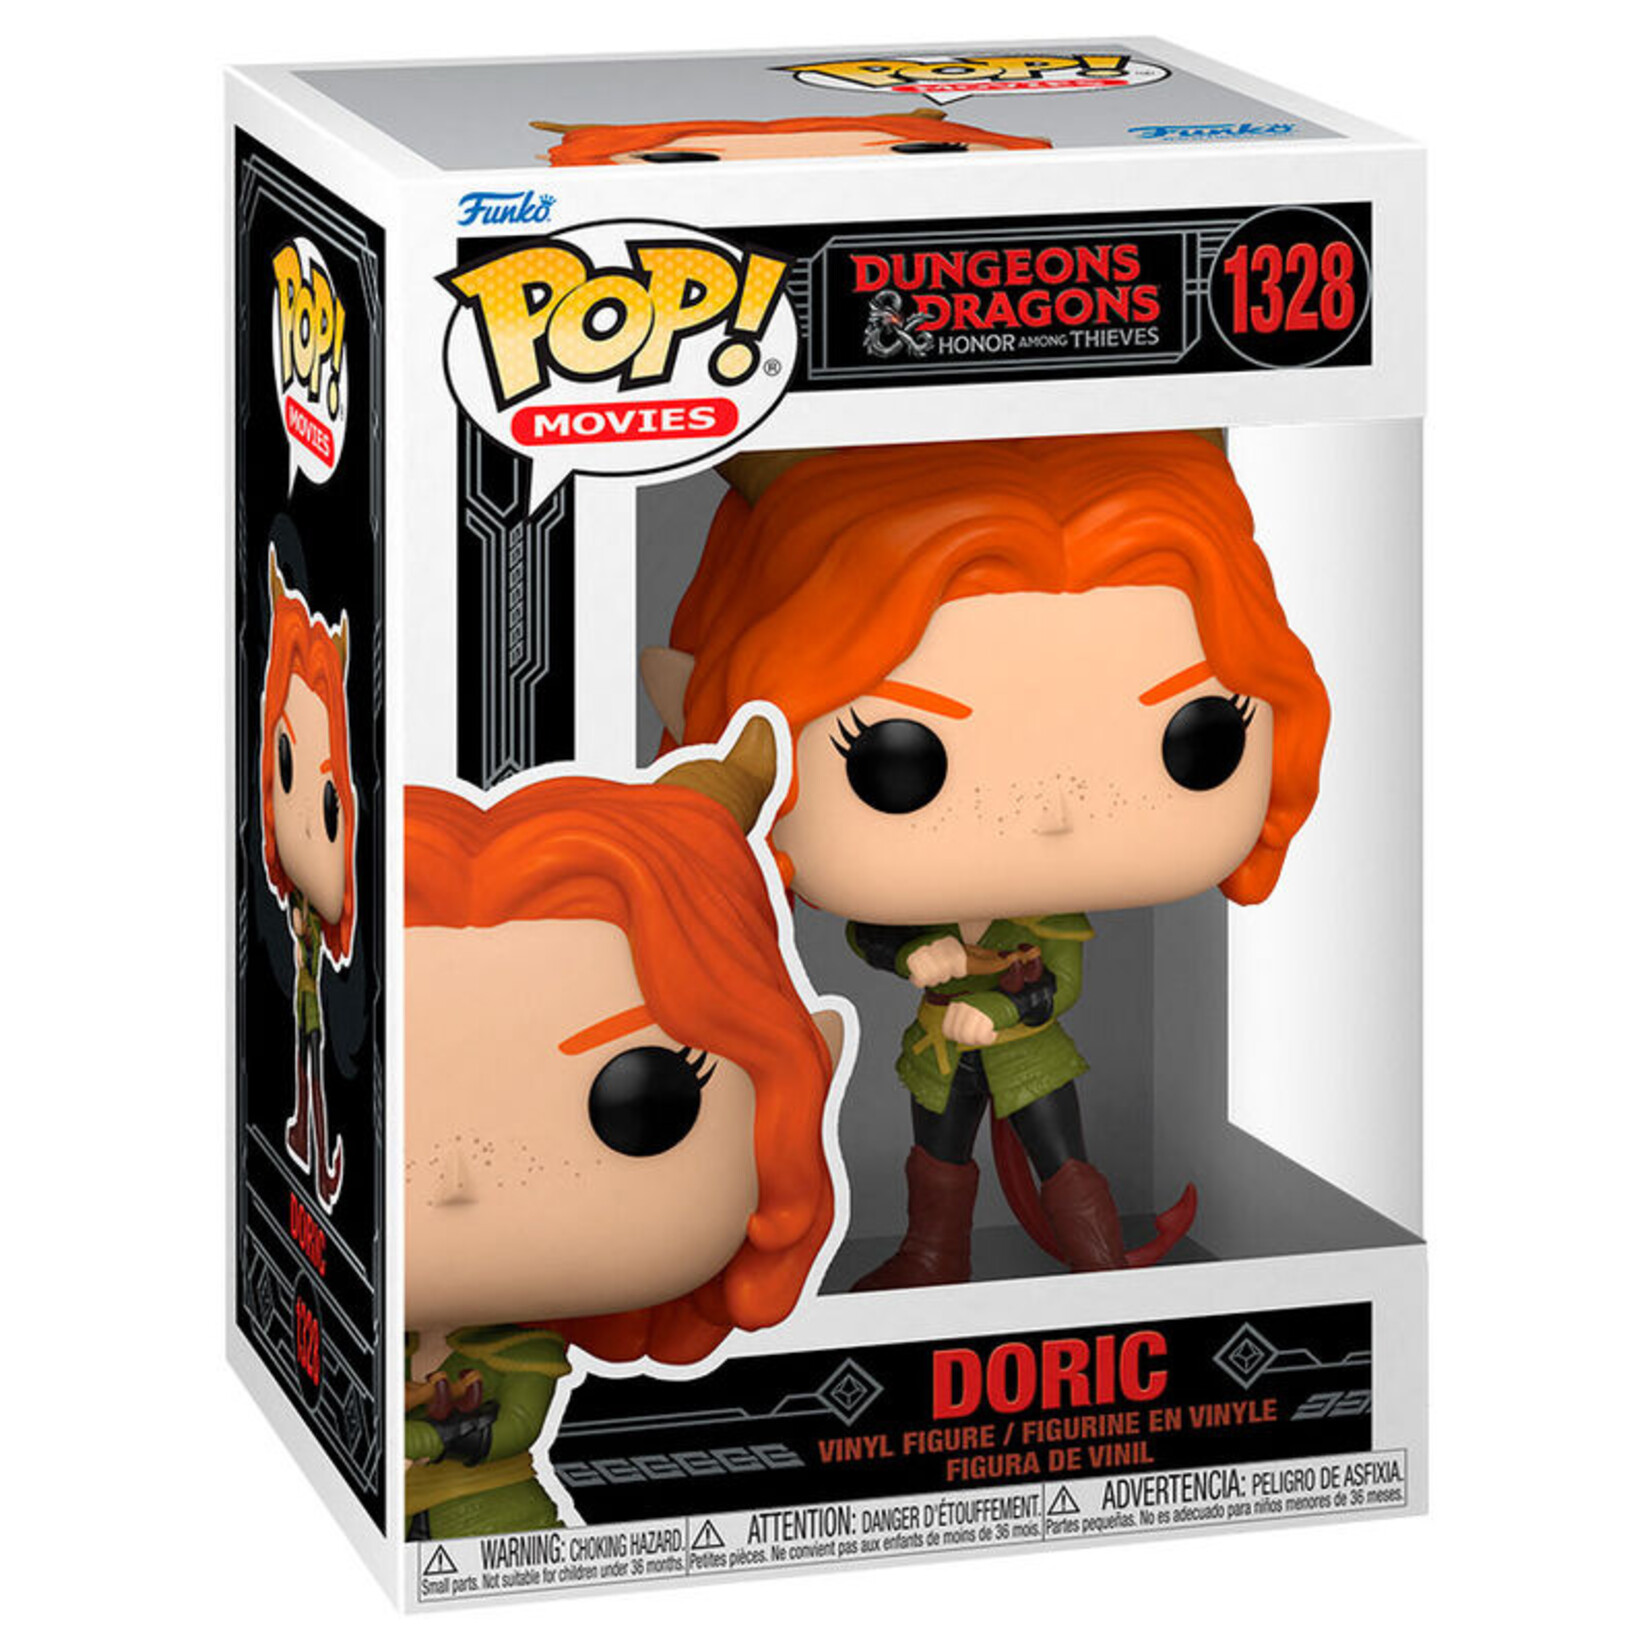 Funko Funko POP! Movies Figure Dungeons & Dragons Honor Among Thieves Doric